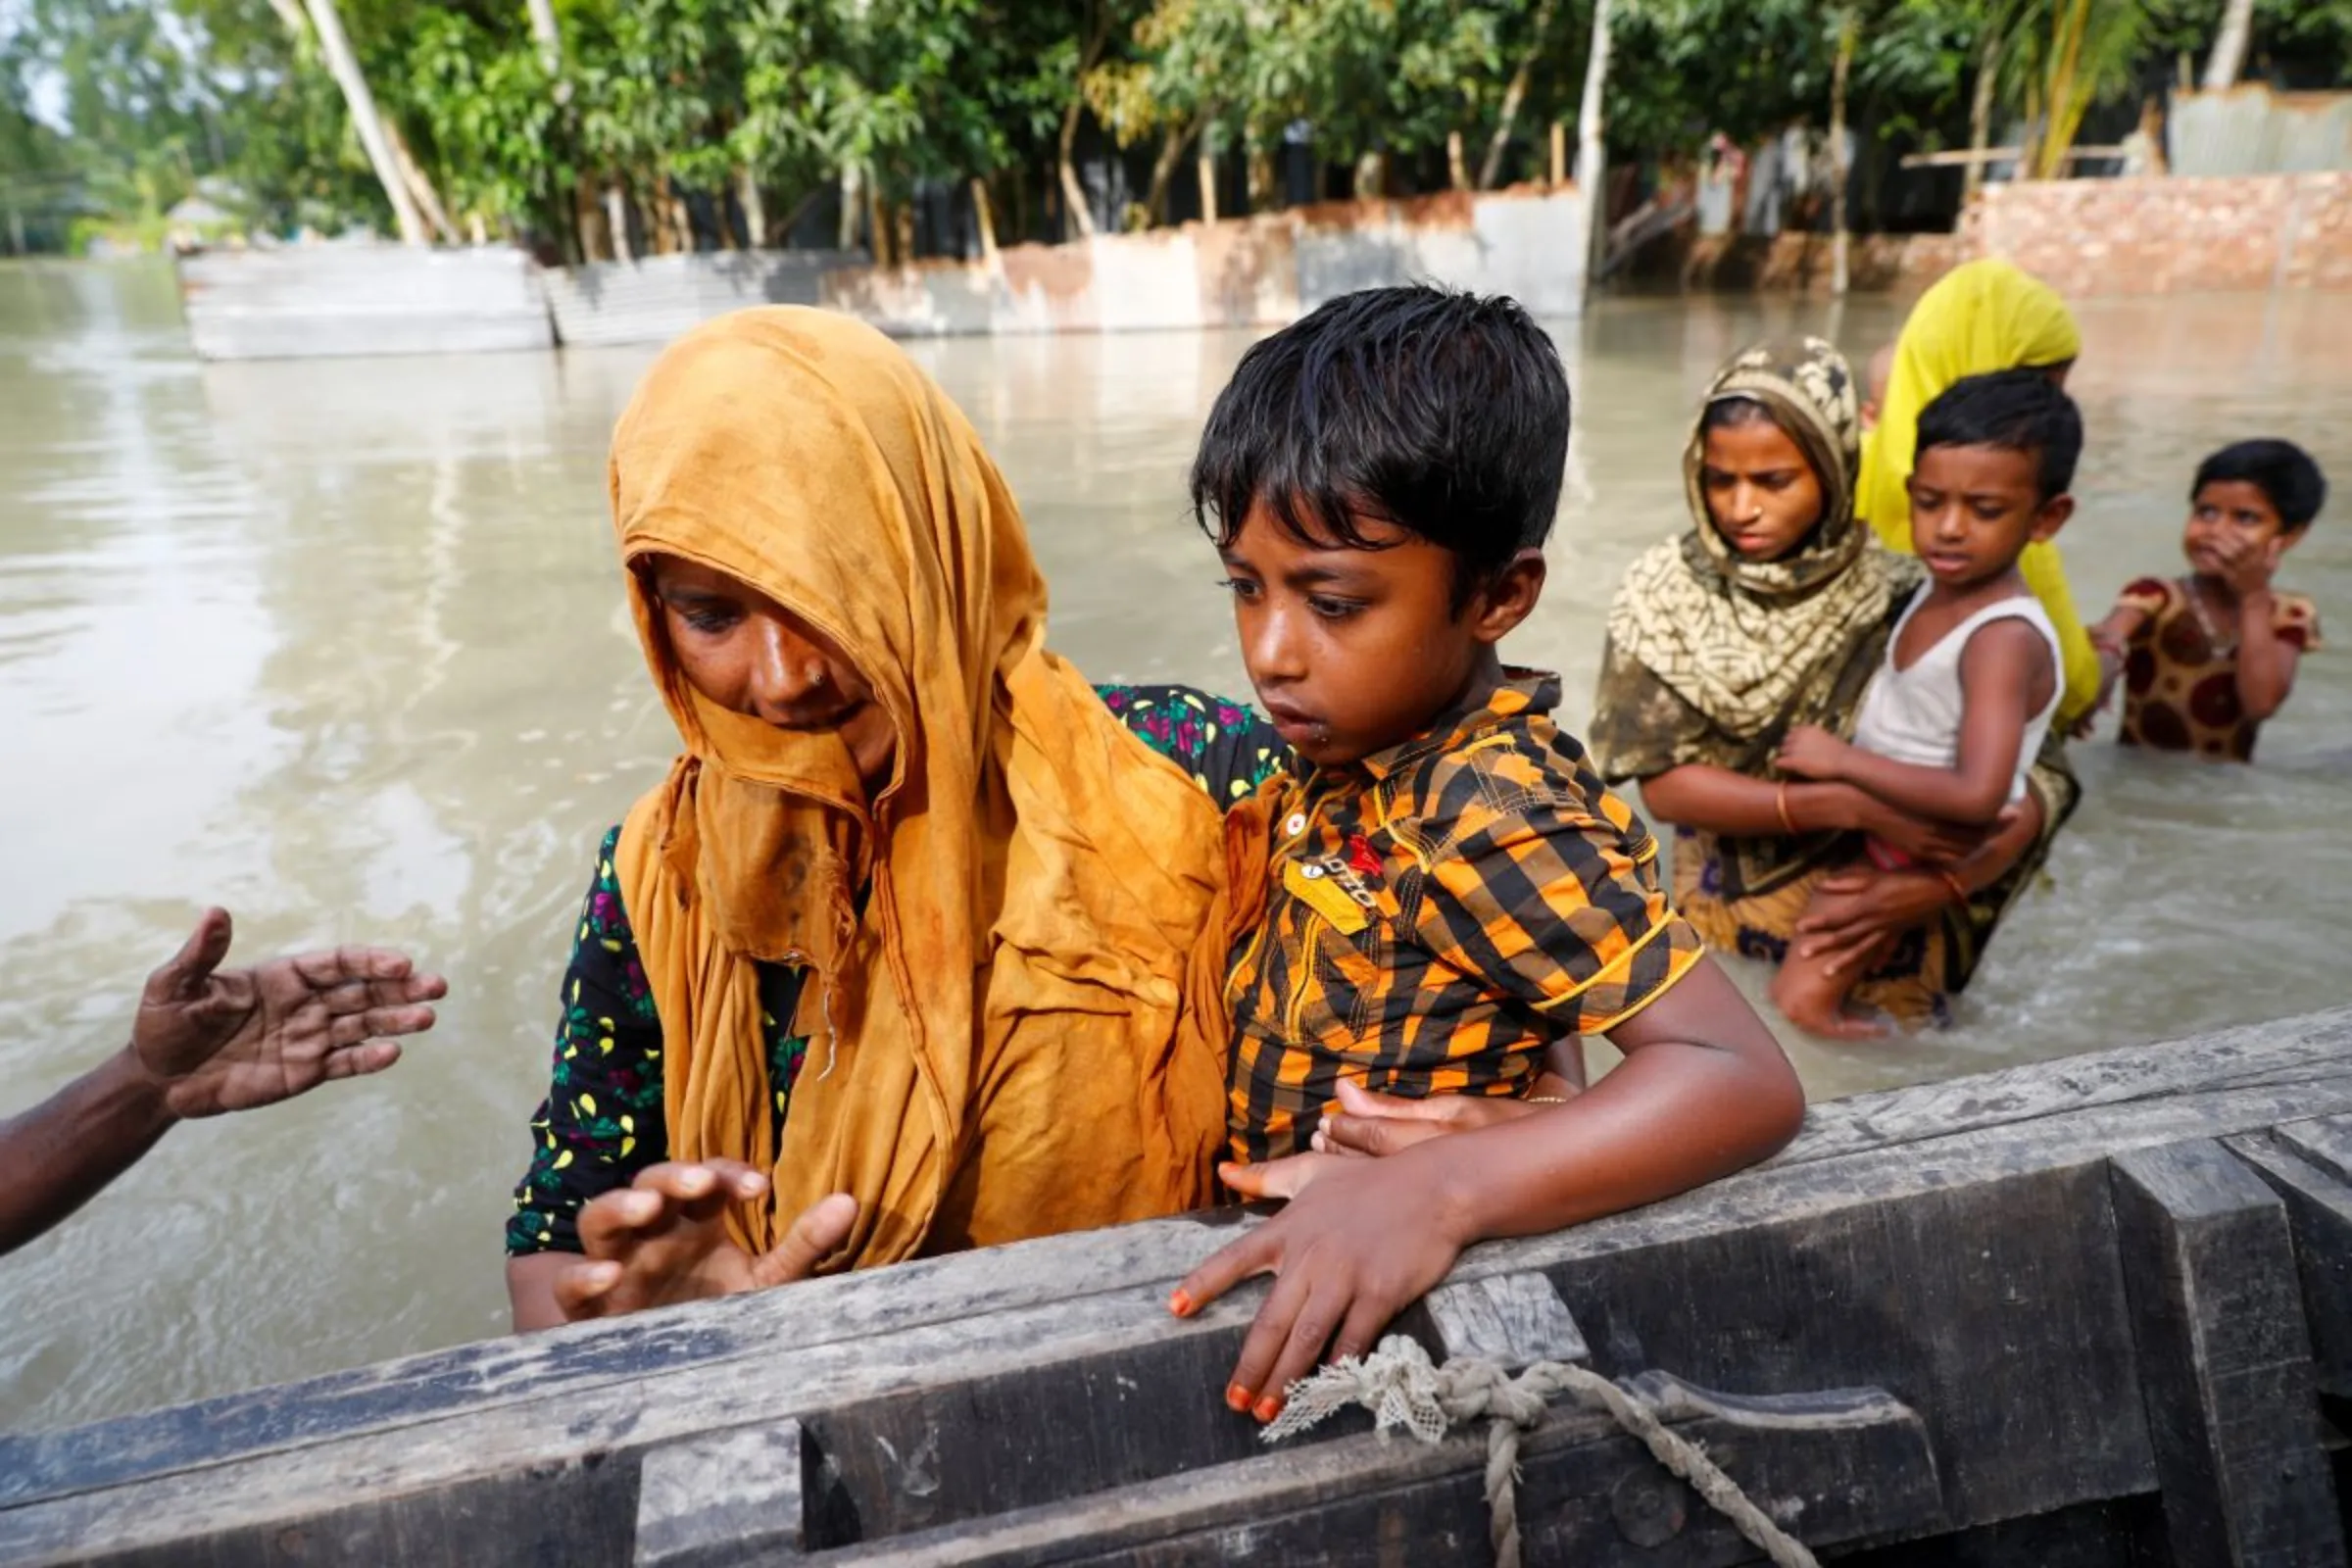 Flood-affected people get on a boat to cross a stream in Jamalpur, Bangladesh, July 18, 2020. REUTERS/Mohammad Ponir Hossain